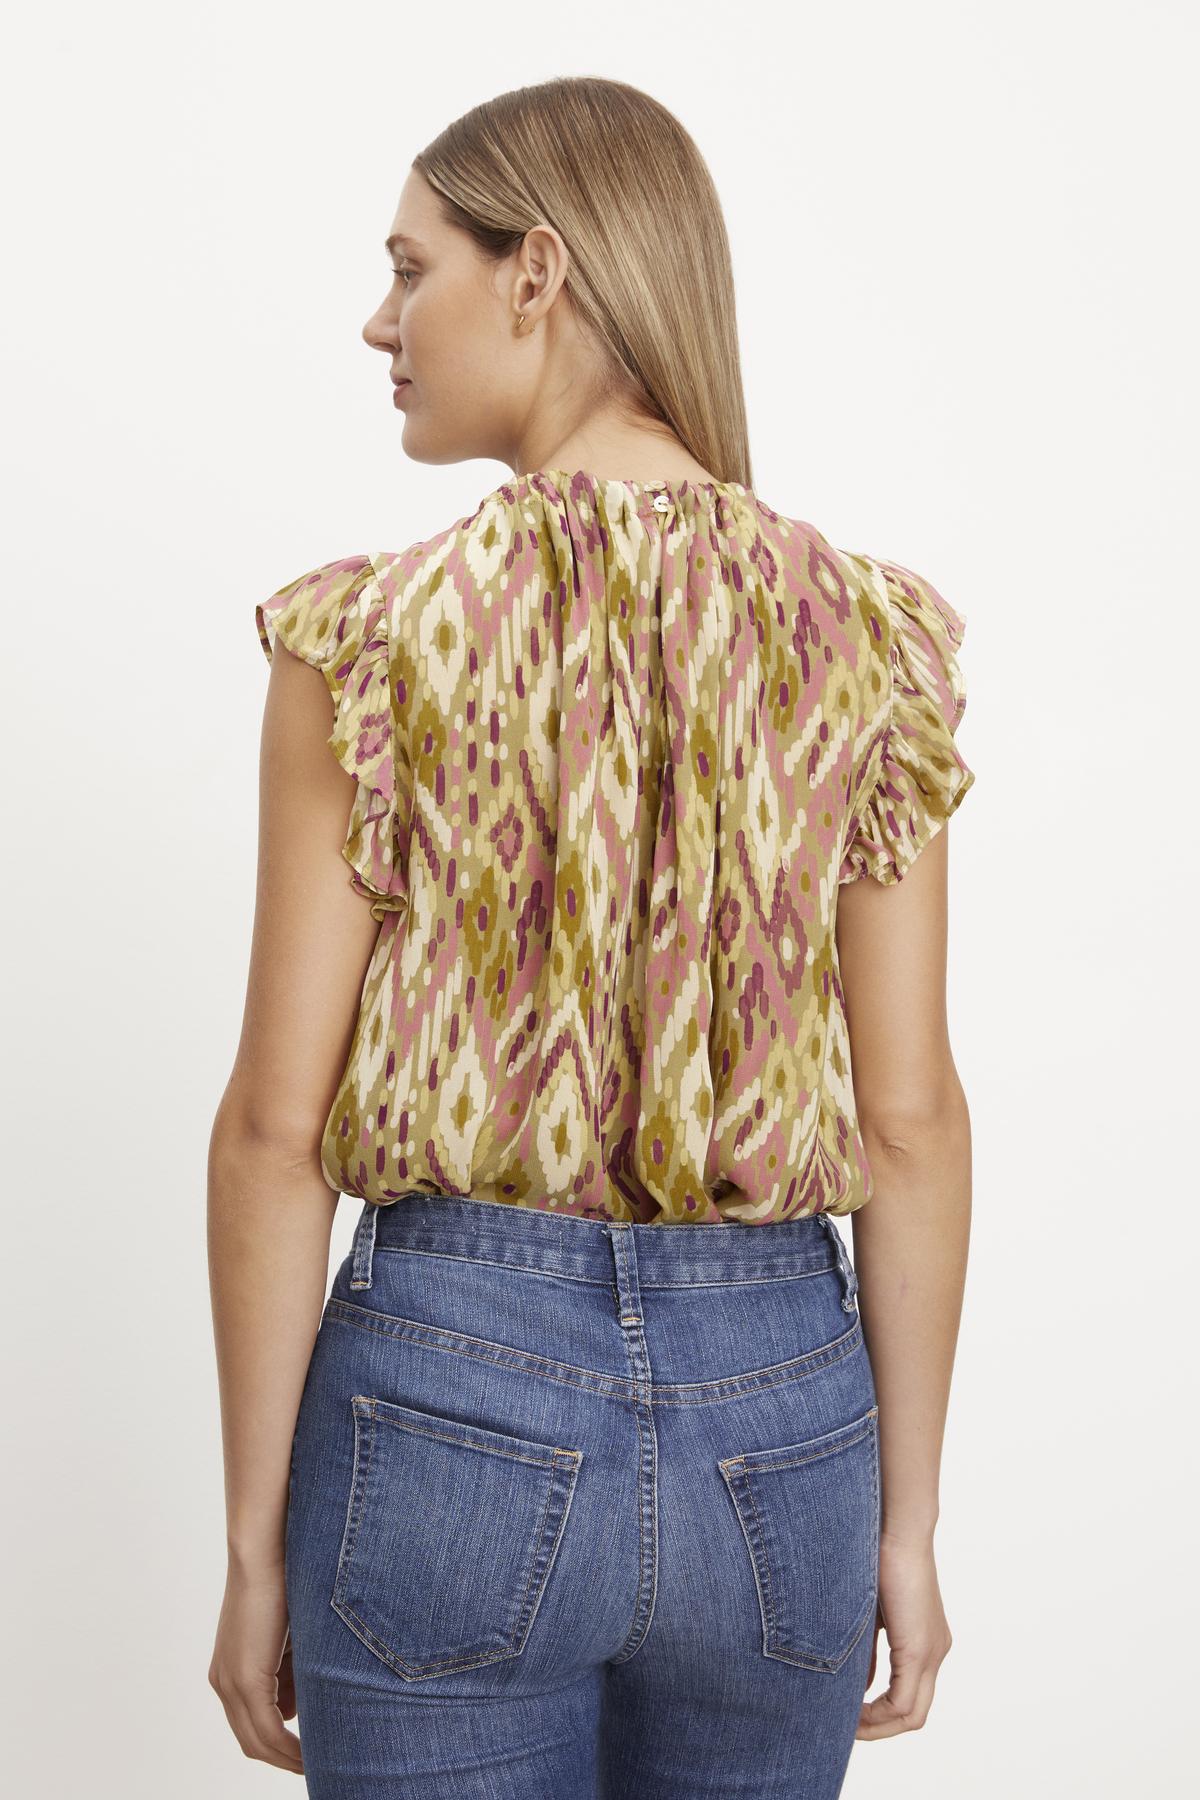 The back view of a woman wearing jeans and an ADARA PRINTED FLUTTER SLEEVE TOP by Velvet by Graham & Spencer.-36094266441921